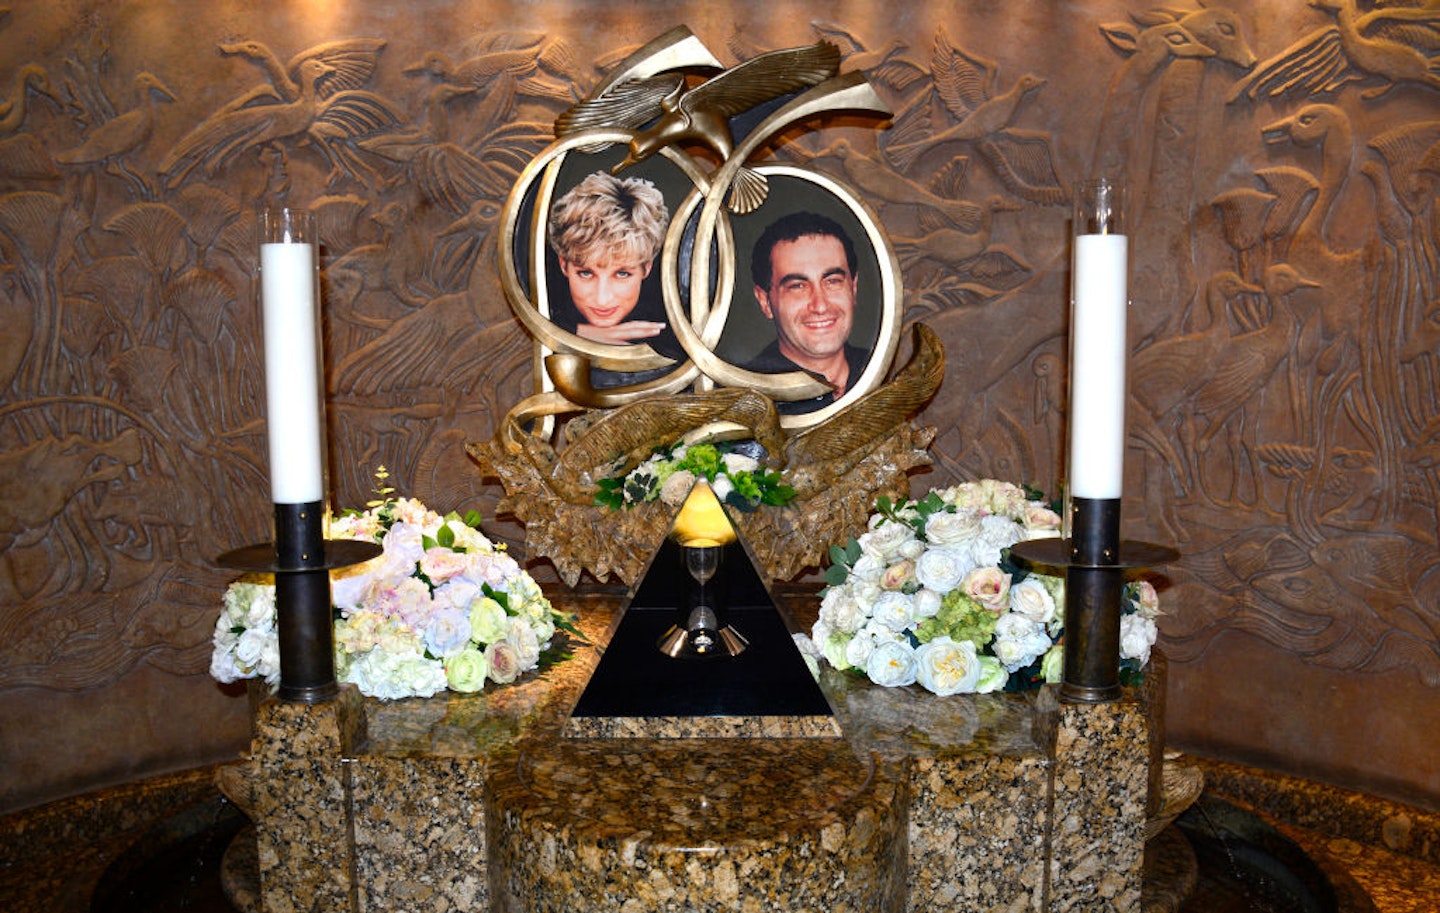 A memorial to Princess Diana and Dodi Fayed is an attraction at Harrods department store in London